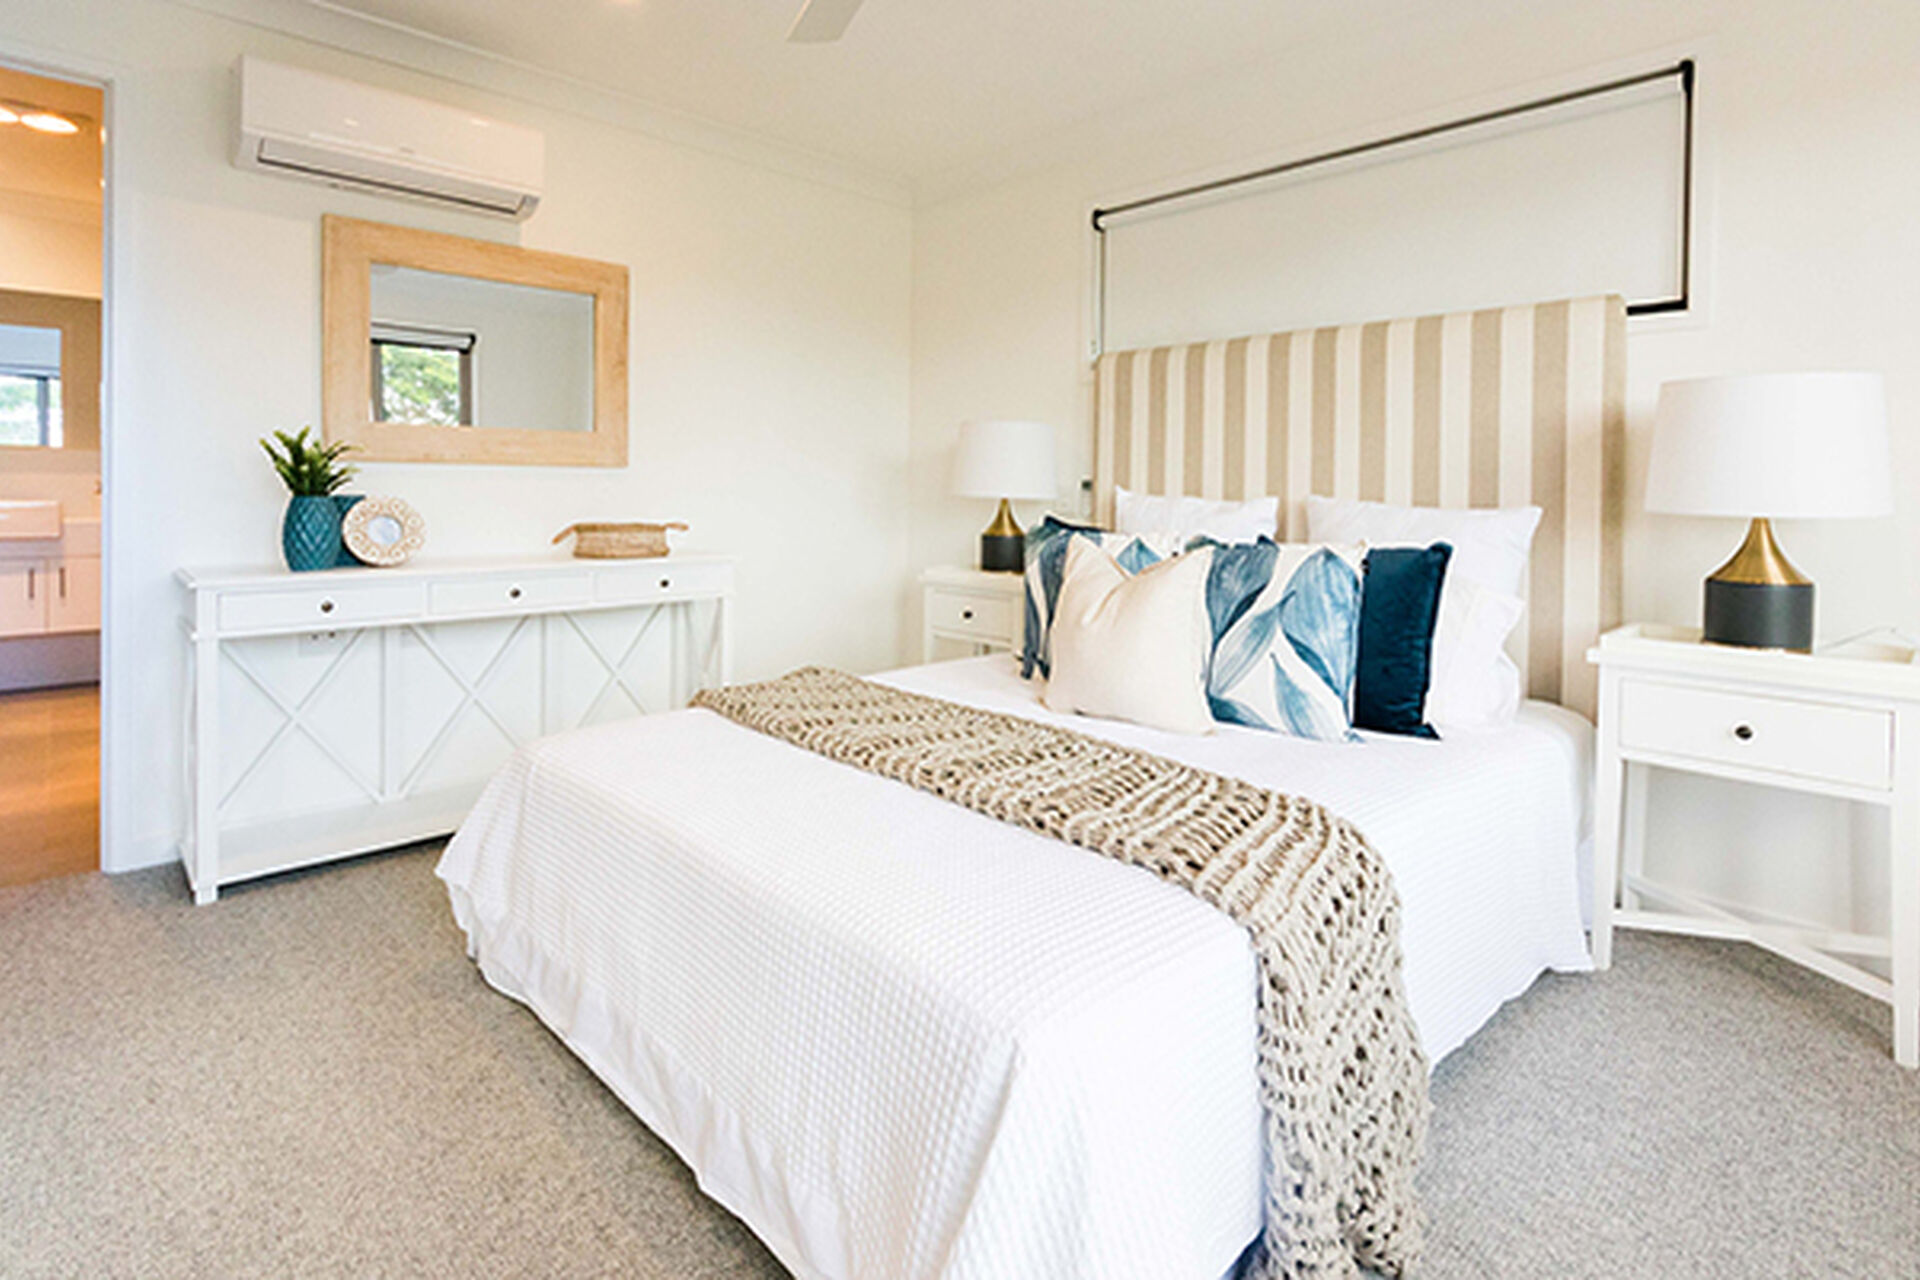 modern furnished bedroom of retirement village apartment with ensuite baptistcare maranoa village in alstonville allowing over 55s to downsizing opportunities